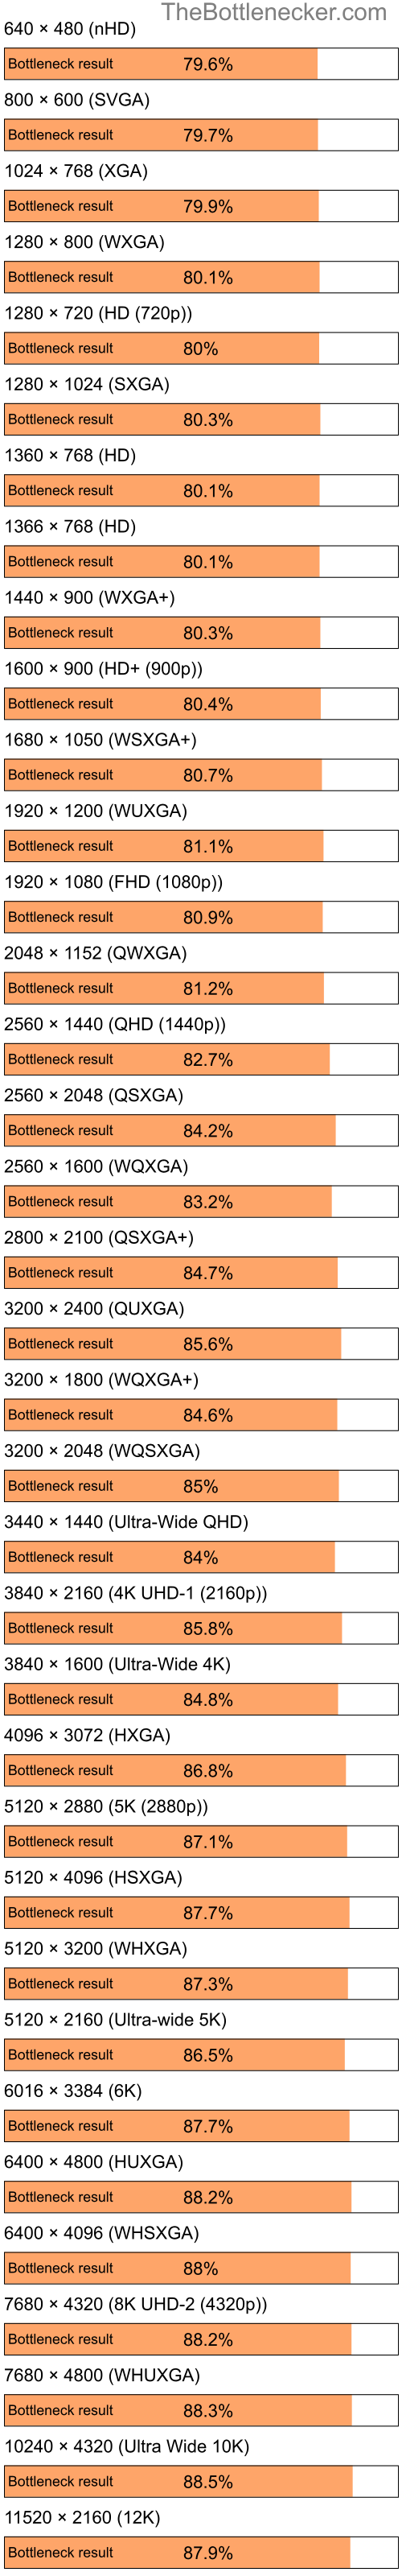 Bottleneck results by resolution for Intel Celeron and NVIDIA GeForce FX 5700 in Graphic Card Intense Tasks